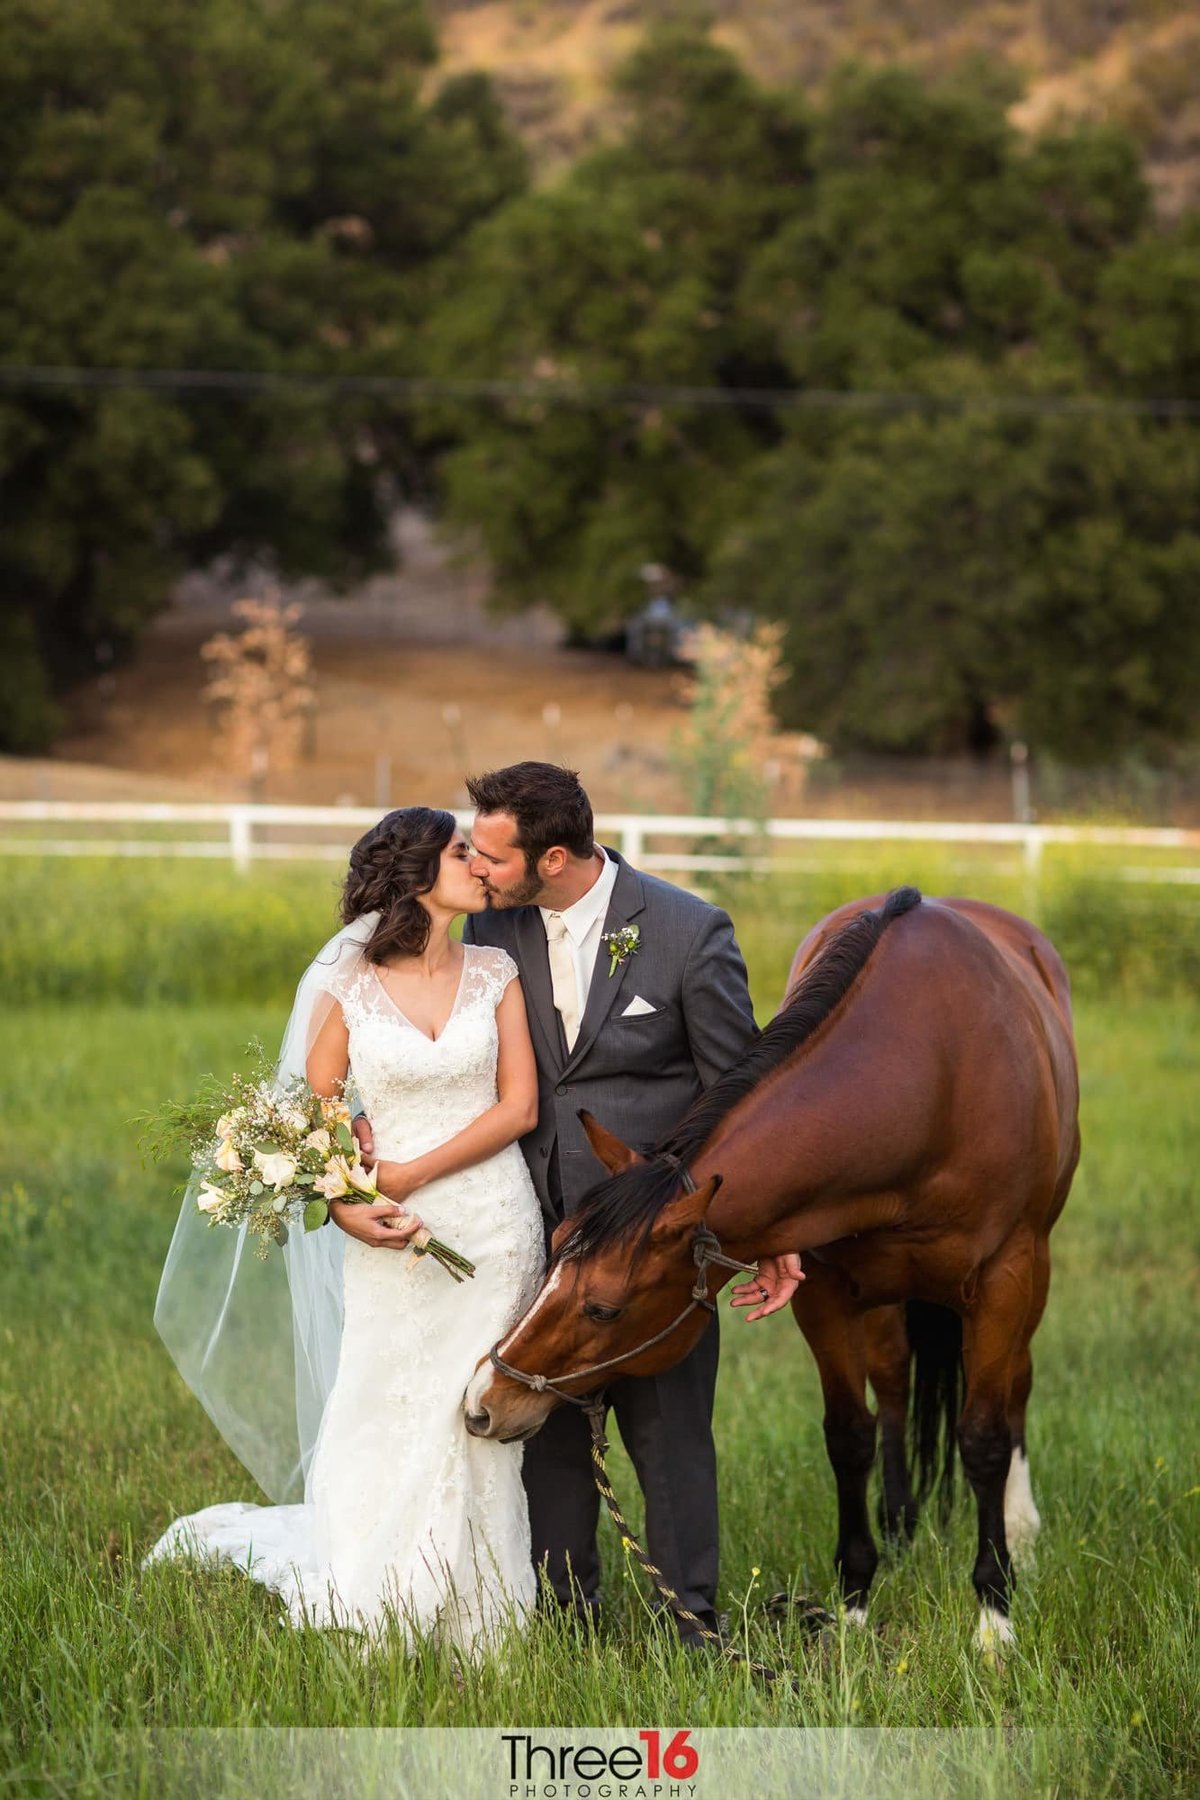 Bride and Groom share a kiss in a grassy field standing next to a horse at the Hold Out Ranch wedding venue